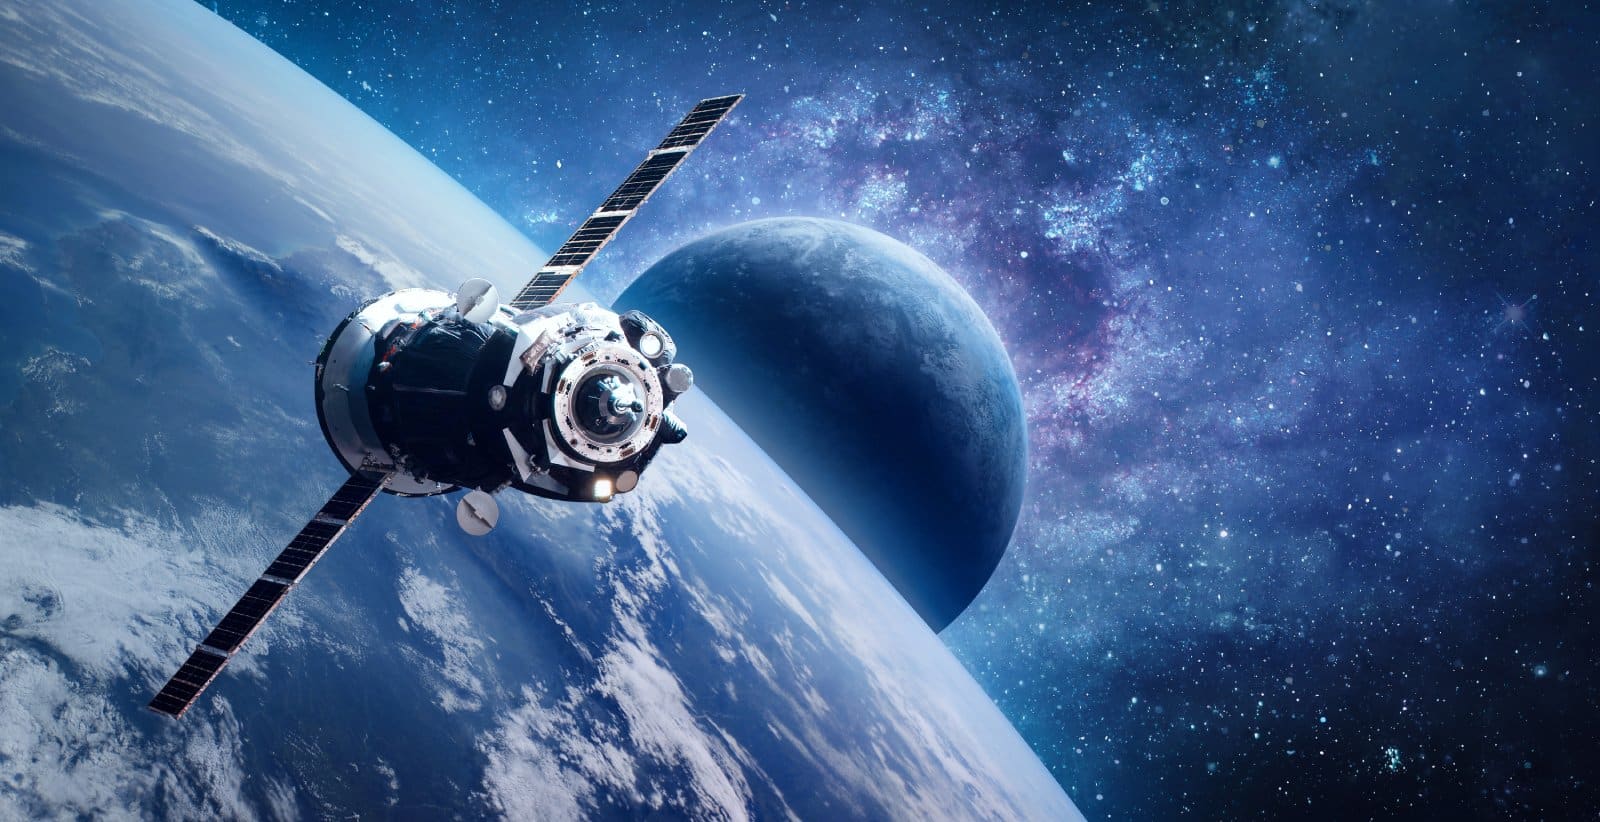 <p class="wp-caption-text">Image Credit: Shutterstock / Dima Zel</p>  <p><span>Suborbital spaceflights represent the threshold of human space exploration, offering a brief yet profound journey beyond the confines of Earth’s atmosphere. This experience allows you to witness the curvature of the Earth against the backdrop of the infinite cosmos, a sight that has transformed the perspective of many astronauts.</span></p> <p><span>During the flight, you’ll experience a few minutes of weightlessness, floating freely within the cabin, an exhilarating and serene sensation. Companies leading this venture, such as Blue Origin and Virgin Galactic, utilize cutting-edge spacecraft designed for safety, comfort, and the optimal viewing experience. The flights are meticulously planned, with each phase — from the rocket’s ascent to the silent glide back to Earth — maximizing the passenger’s experience of space.</span></p> <p><b>Insider’s Tip:</b><span> Opt for a comprehensive training program offered by these companies to prepare physically and mentally for the rigors and euphoria of space travel.</span></p>